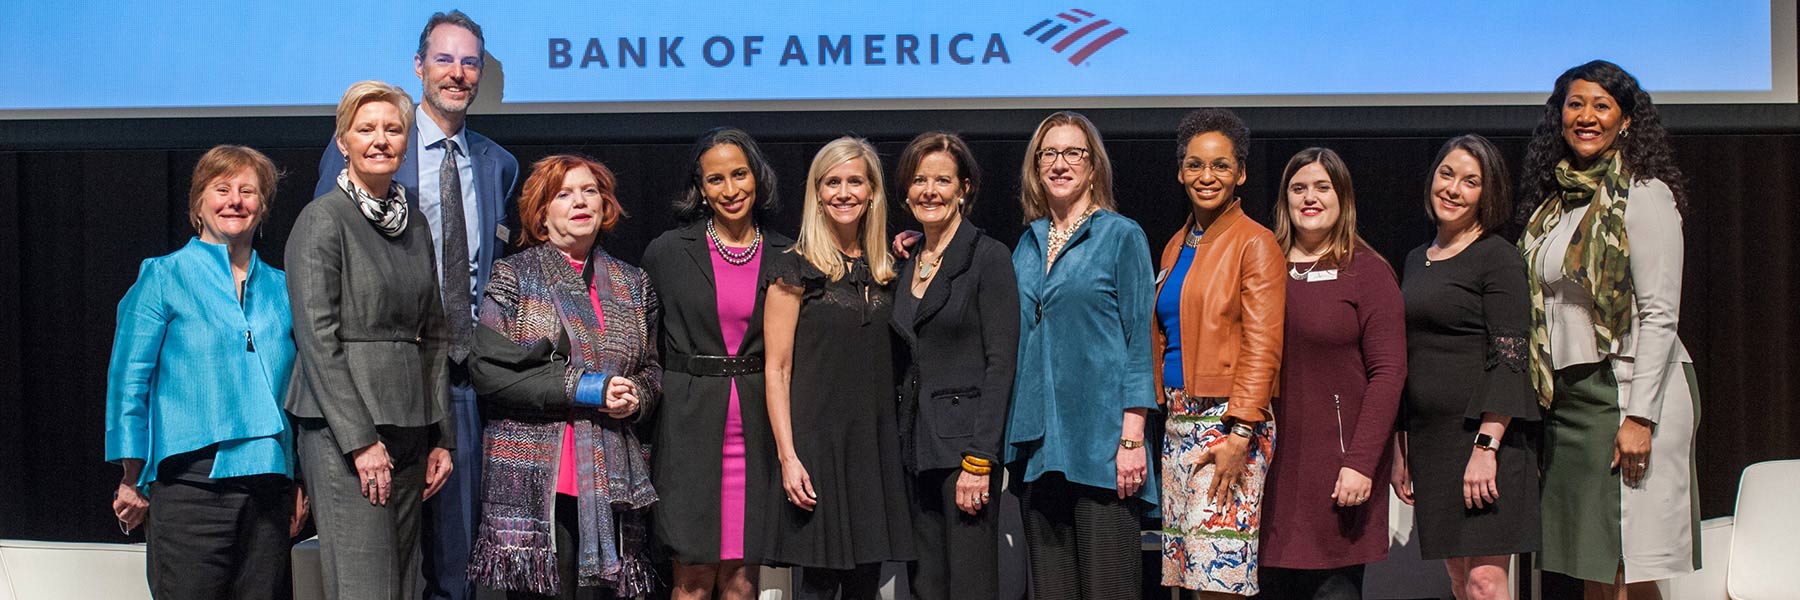 Members of the Women's Philanthropy Institute Council 2019 pose for a portrait on a stage